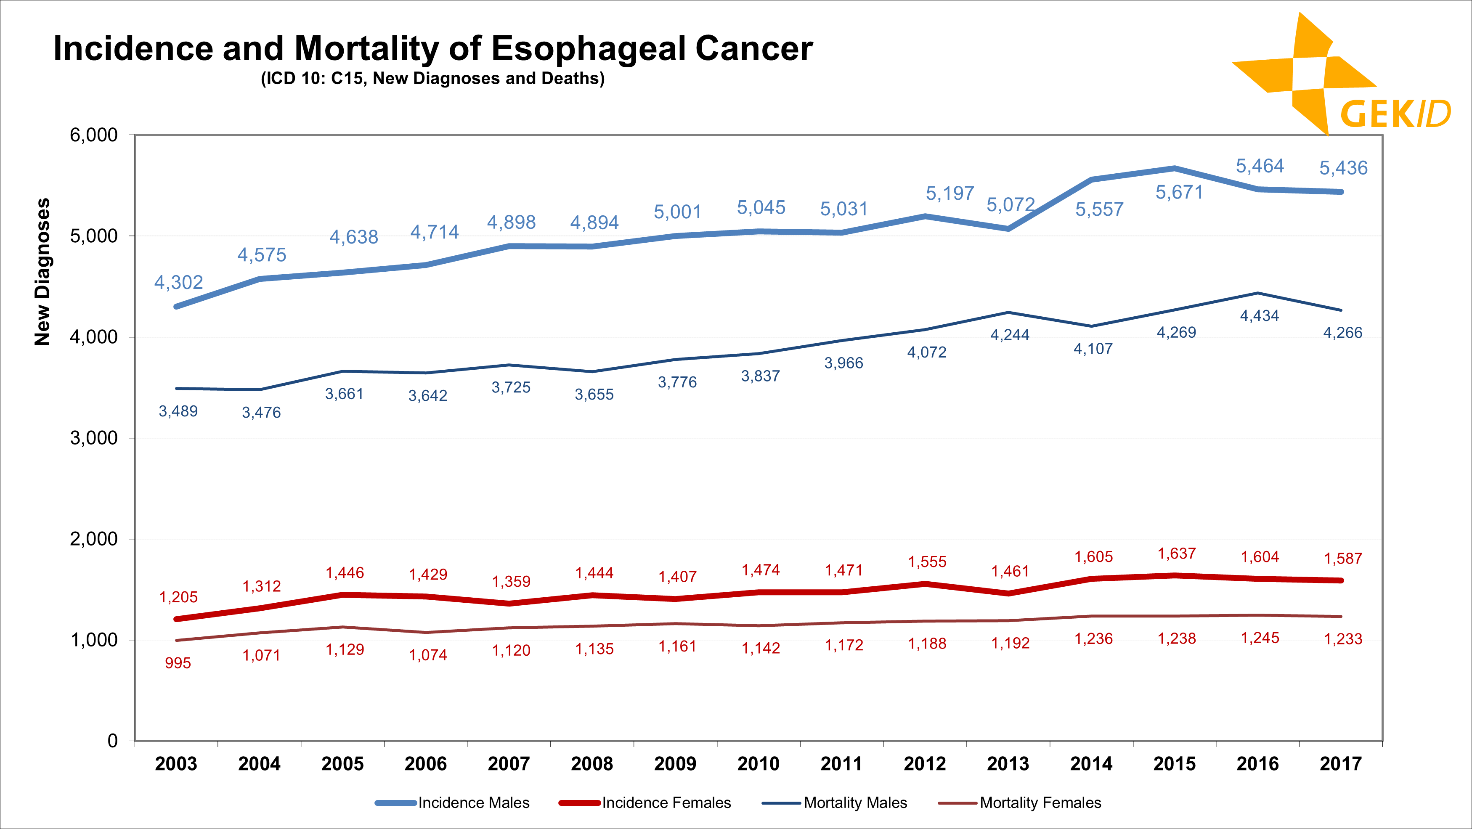 Incidence and mortality of esophageal cancer (ICD 10: C15) in Germany